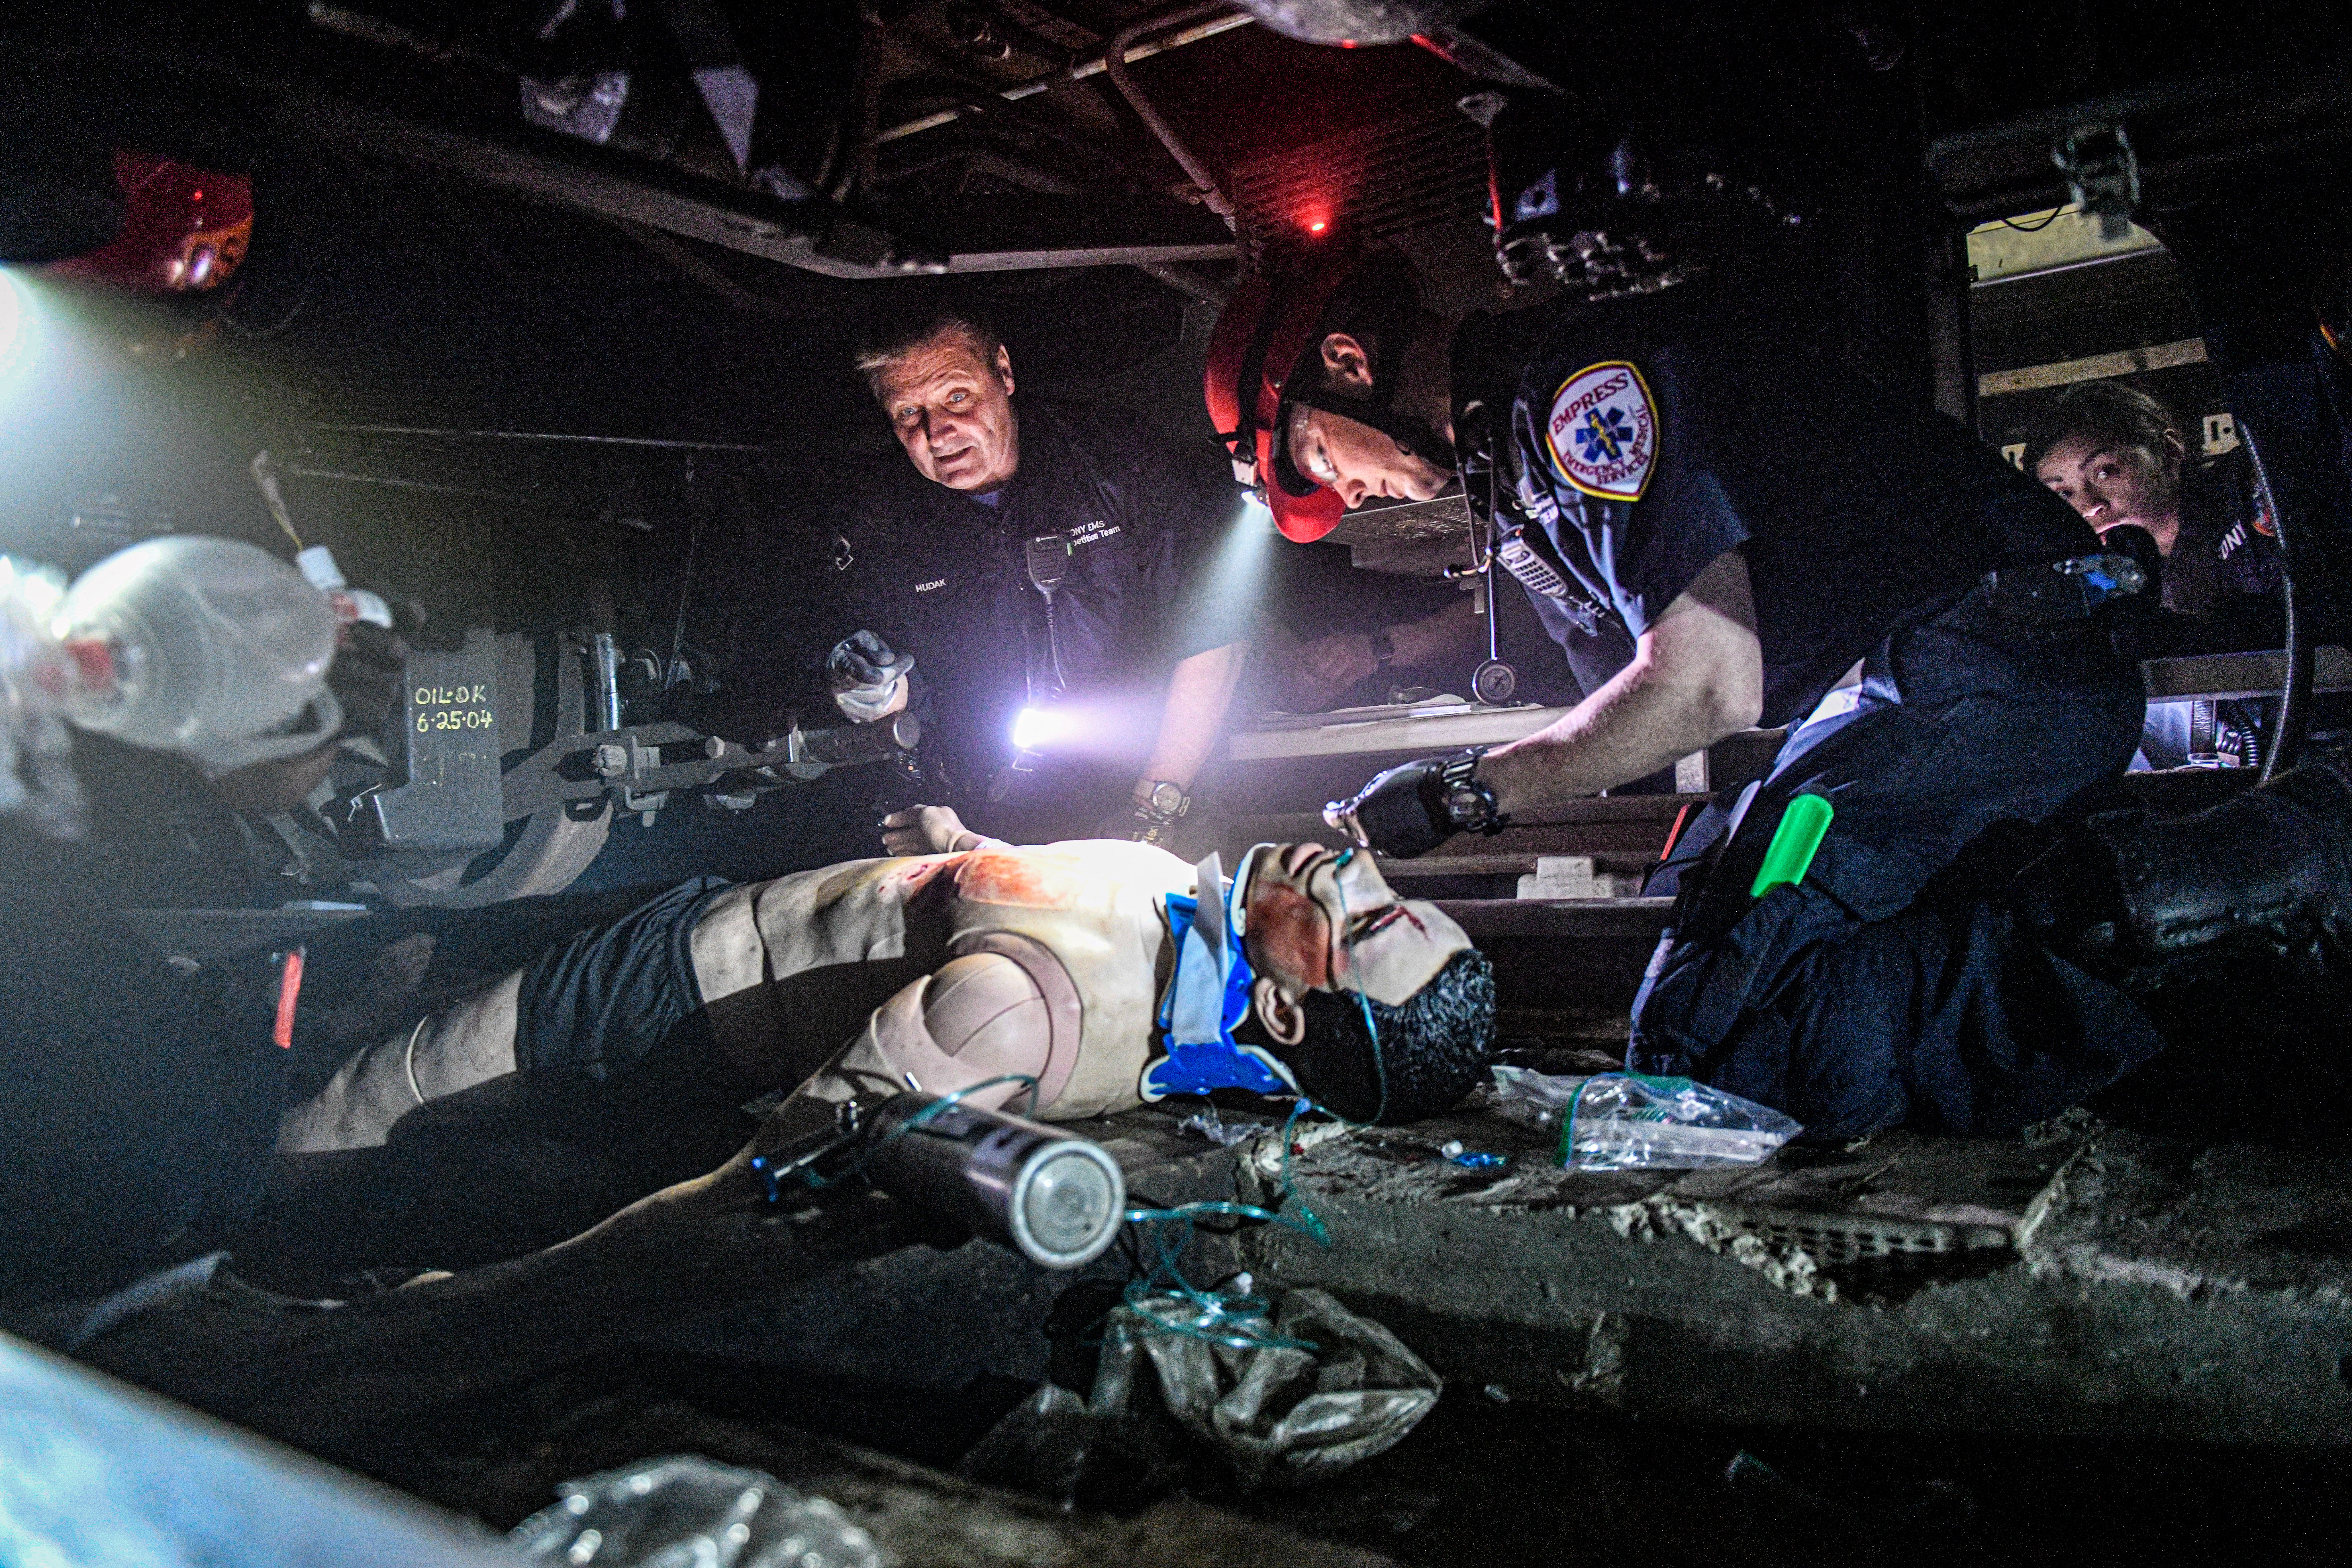 FDNY EMTs use headlamp and right angle lights for training exercise